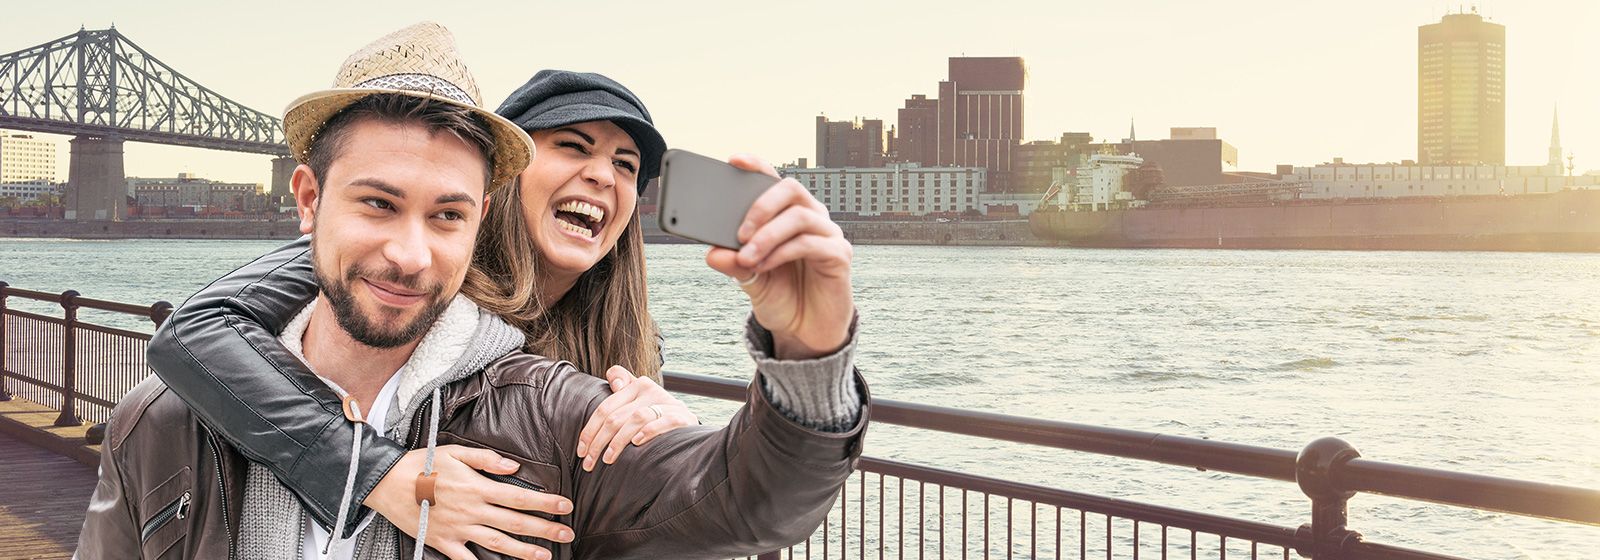 Couple taking a selfie with along the river with a cityscape in the background